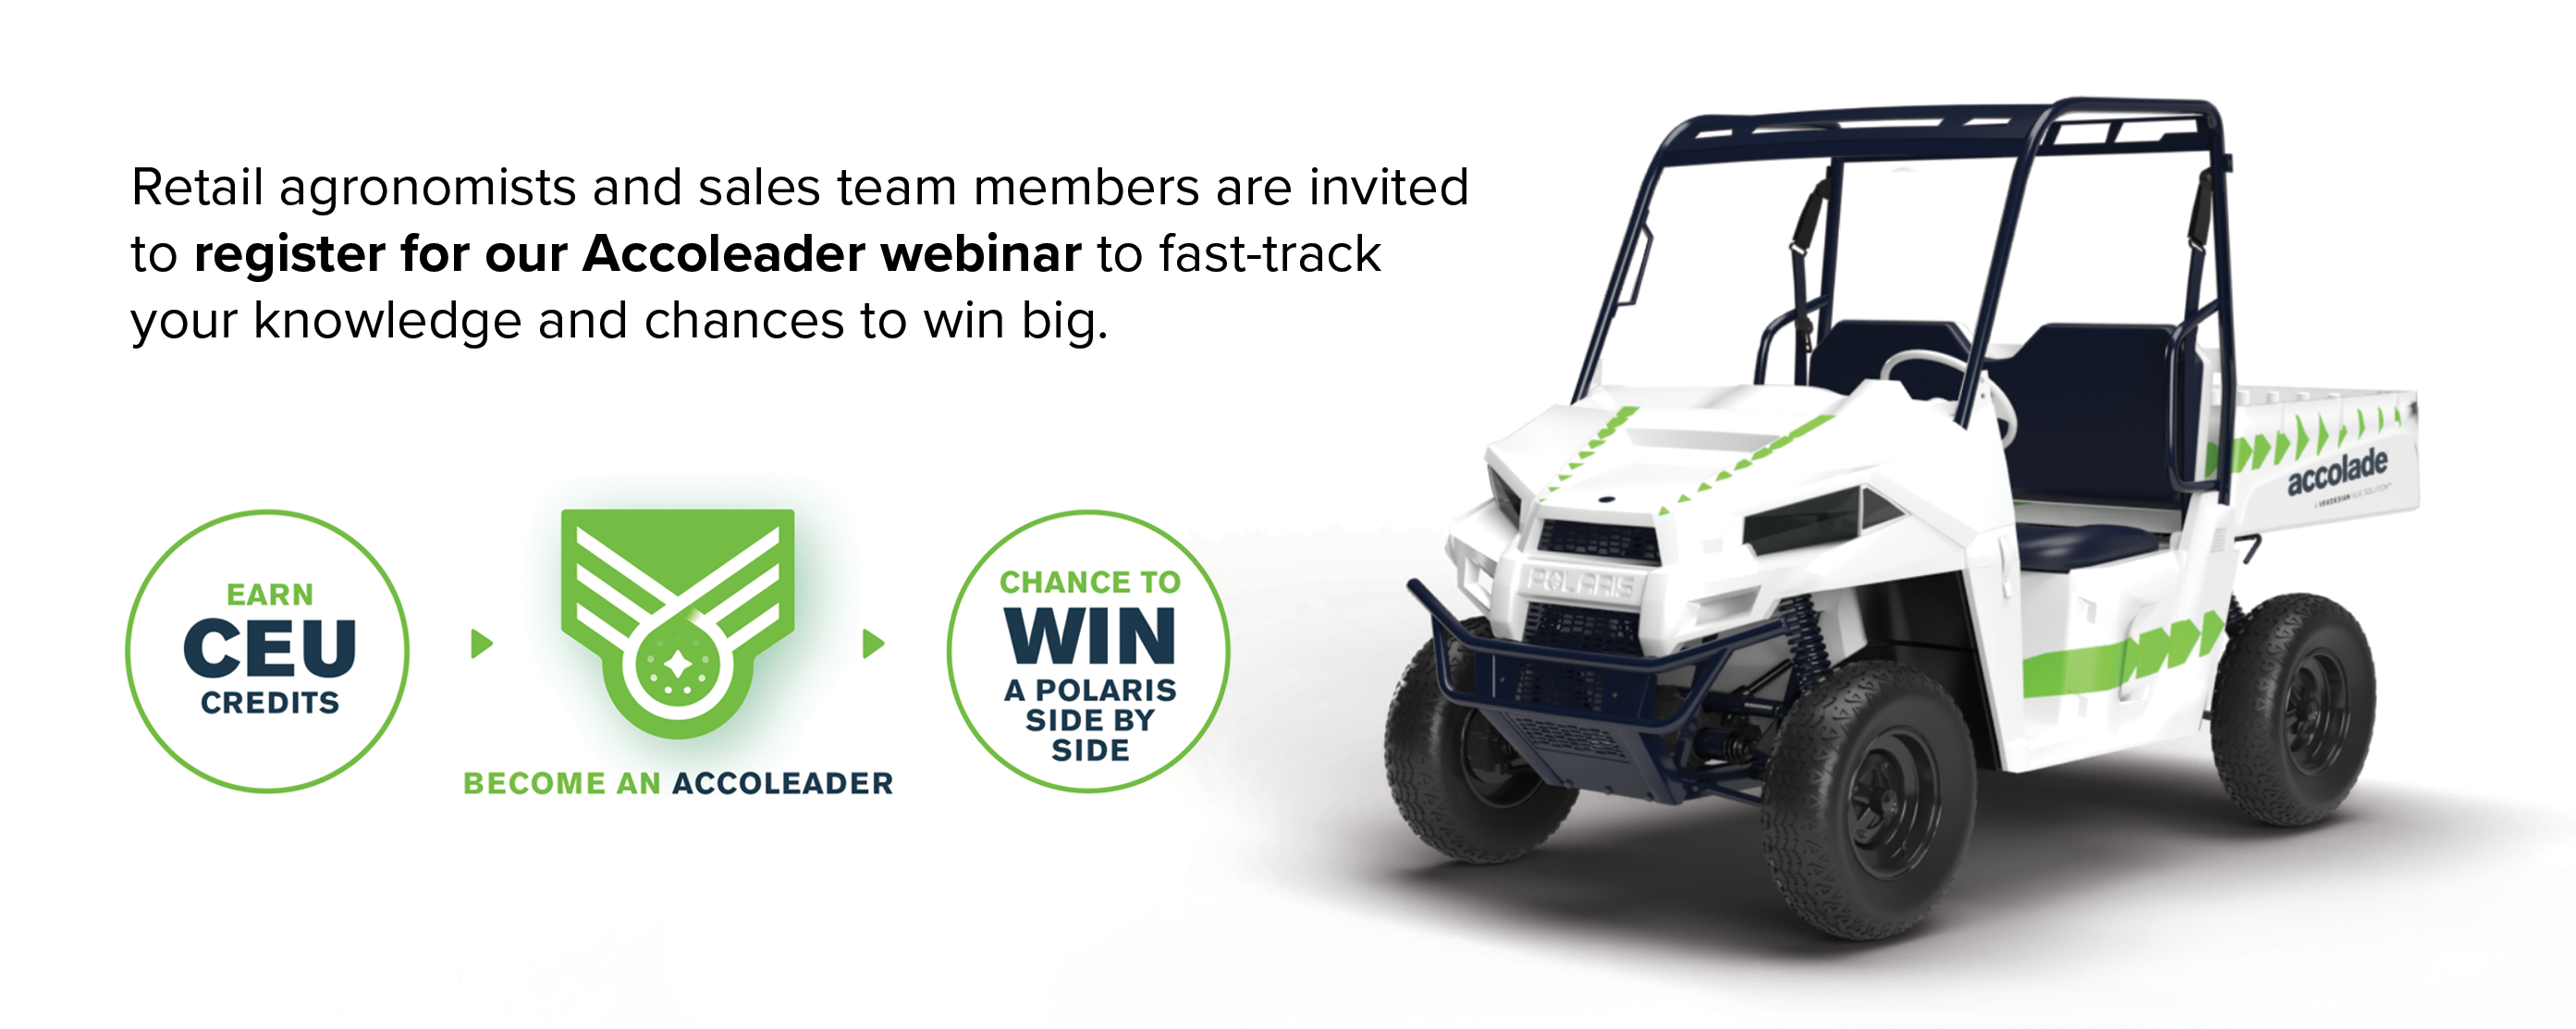 Retail agronomists and sales team members are invited to register for our Accoleader webinar to fast-track your knowledge and chances to win big.